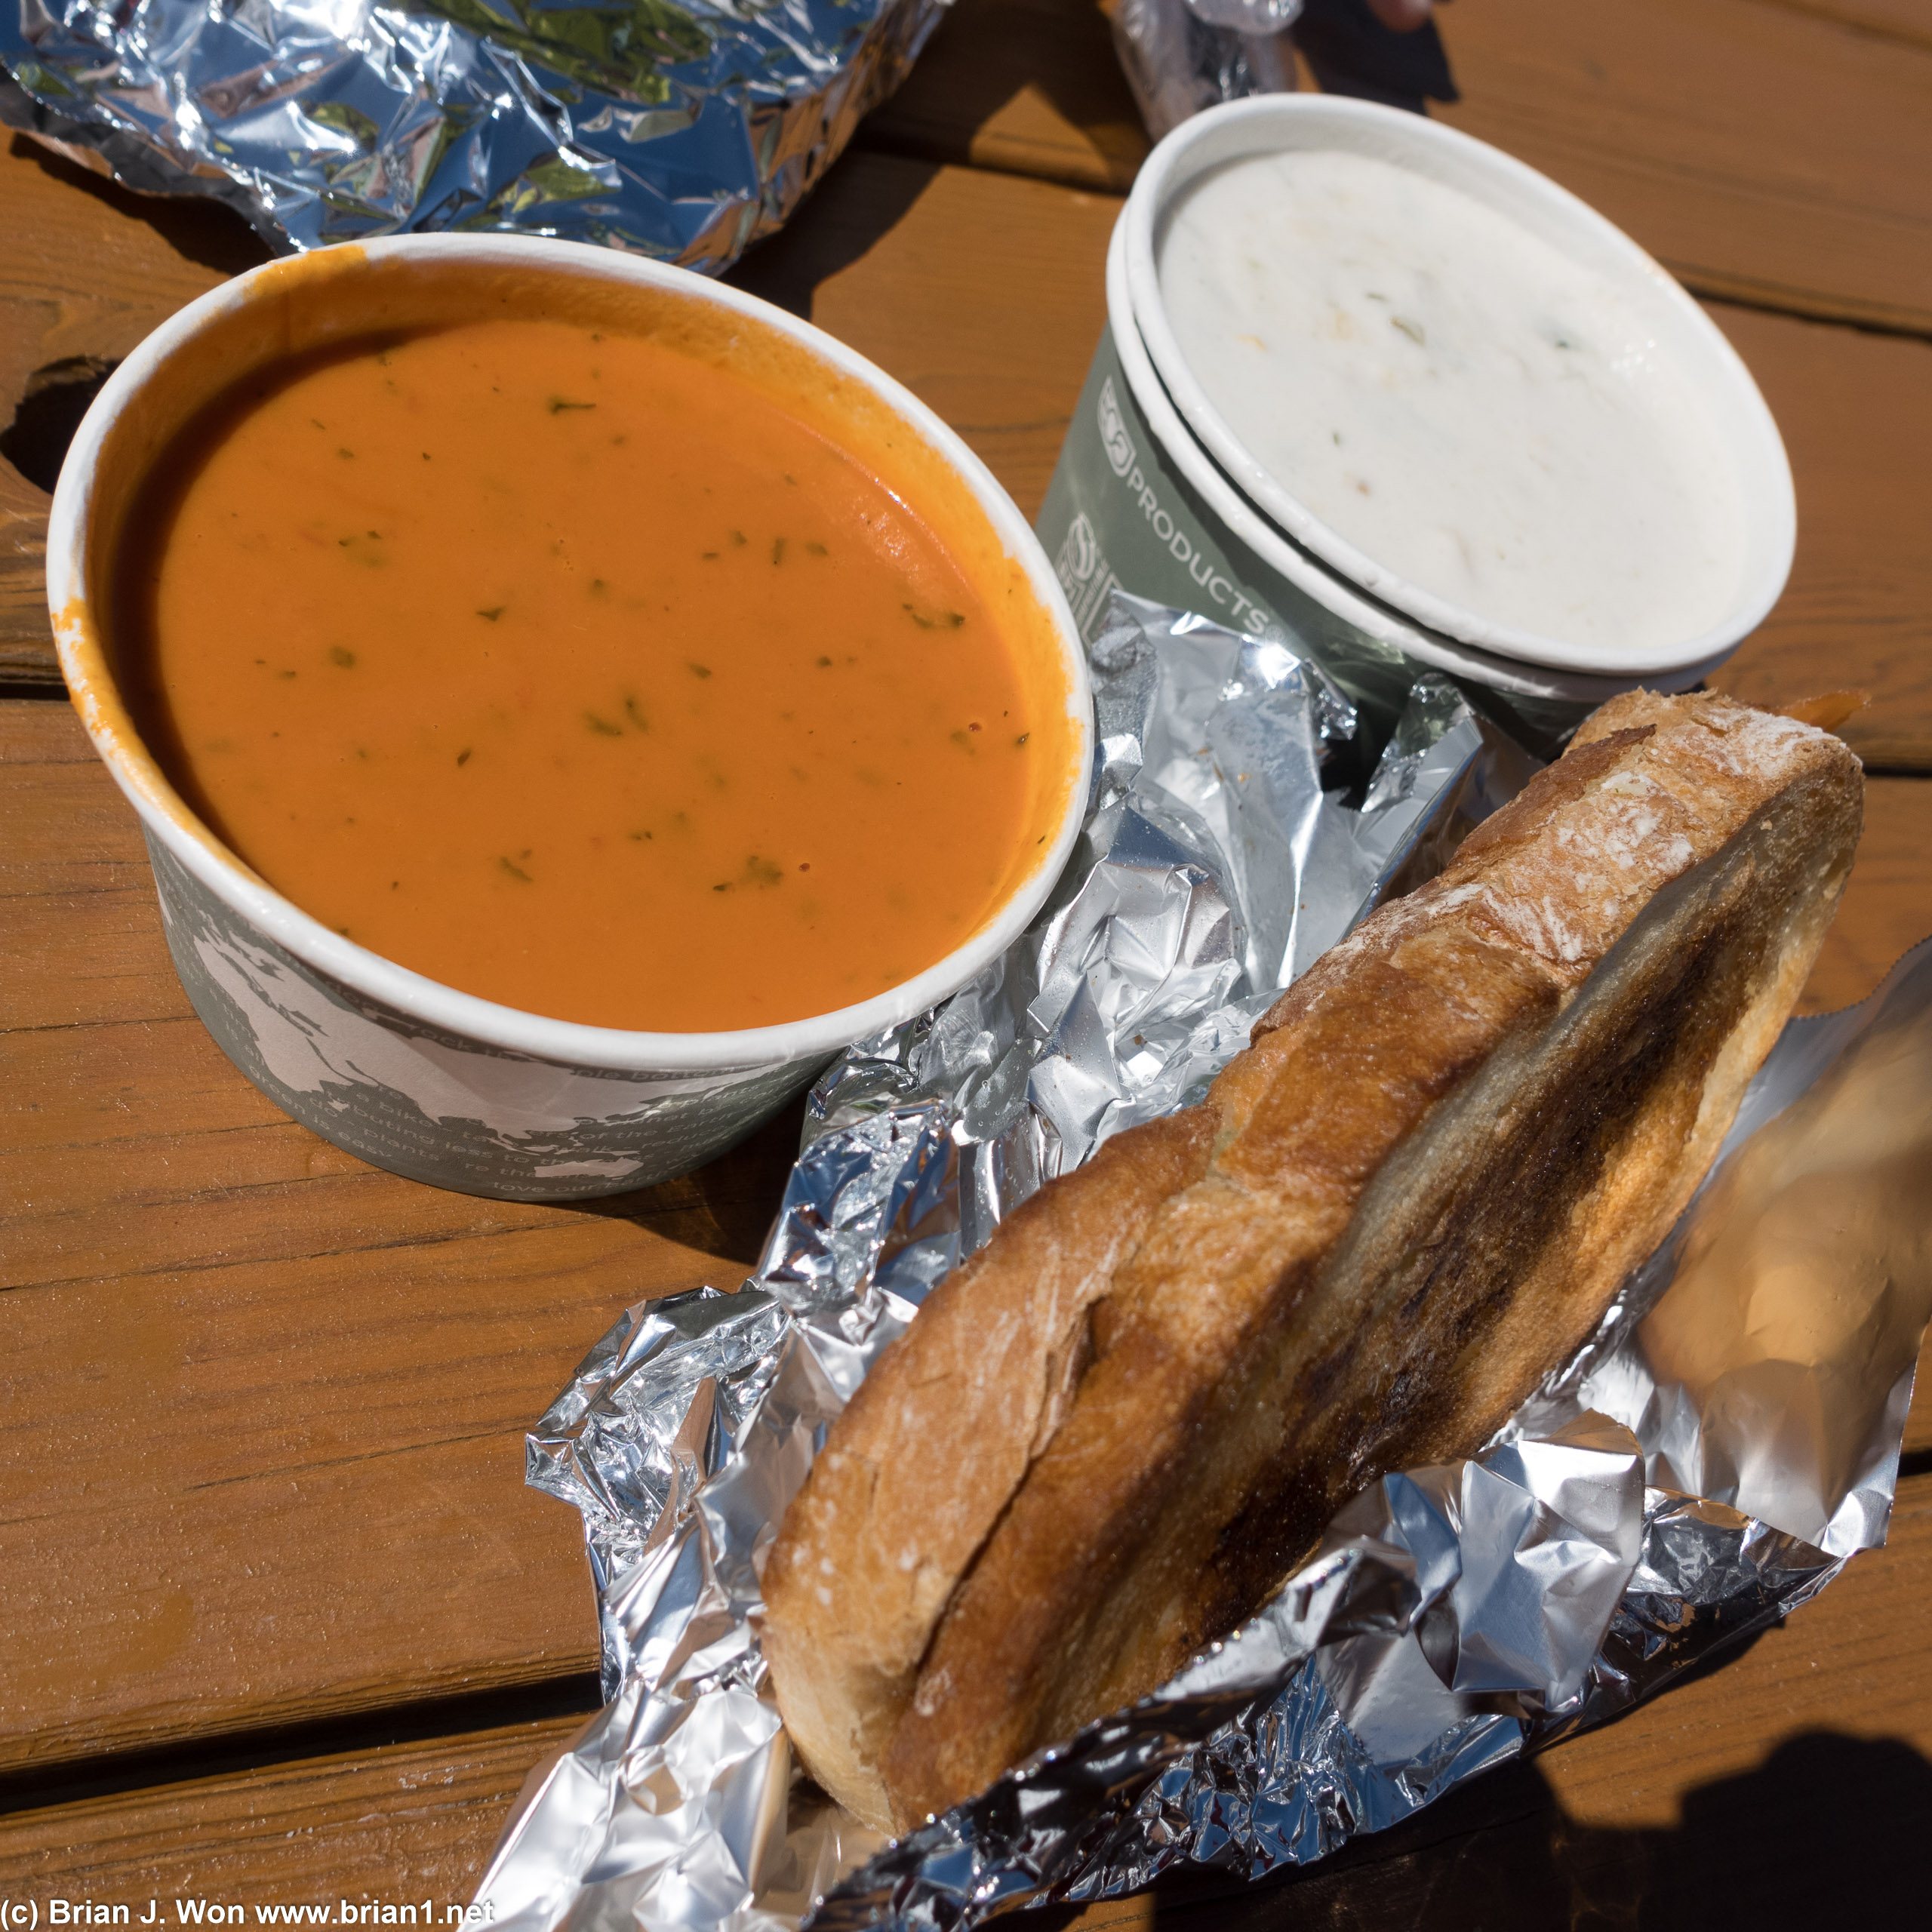 Grilled cheese and soups at The Outpost.